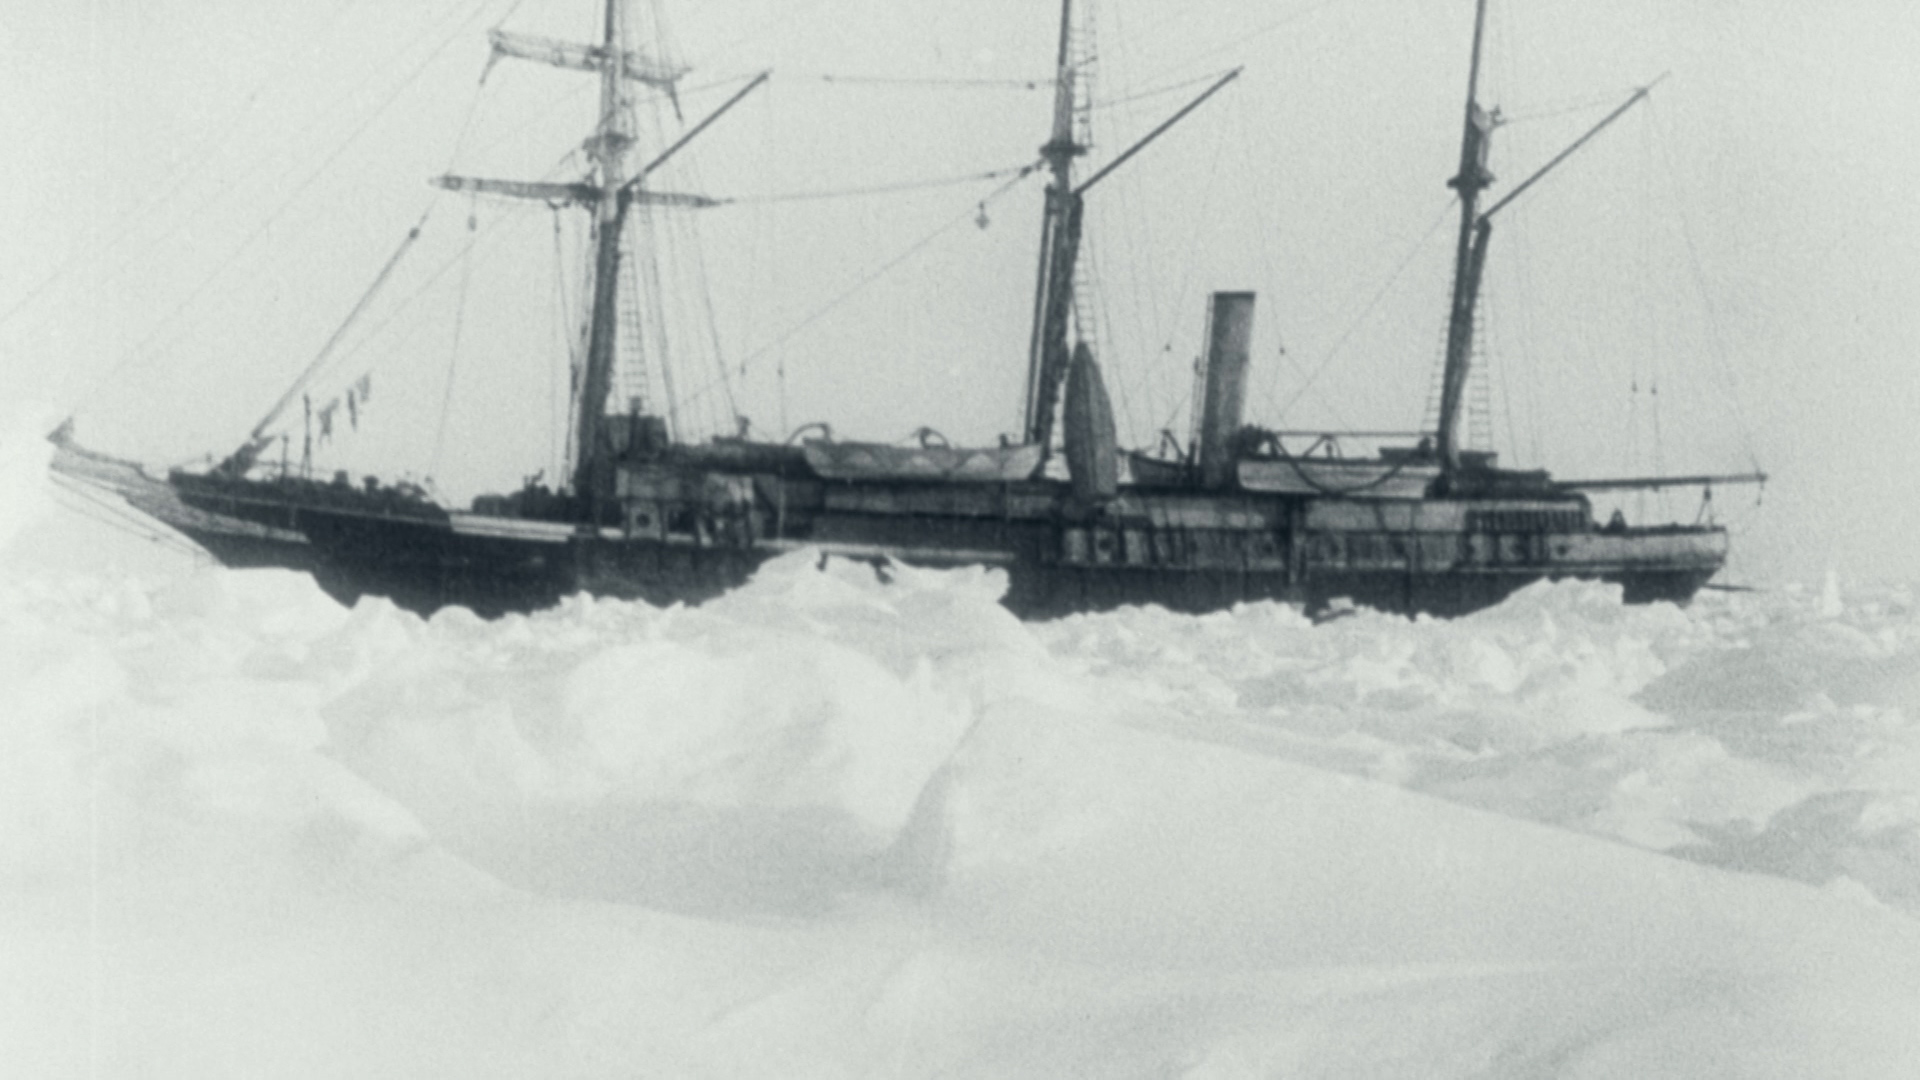 Shackleton's Endurance: The Lost Ice Ship Found